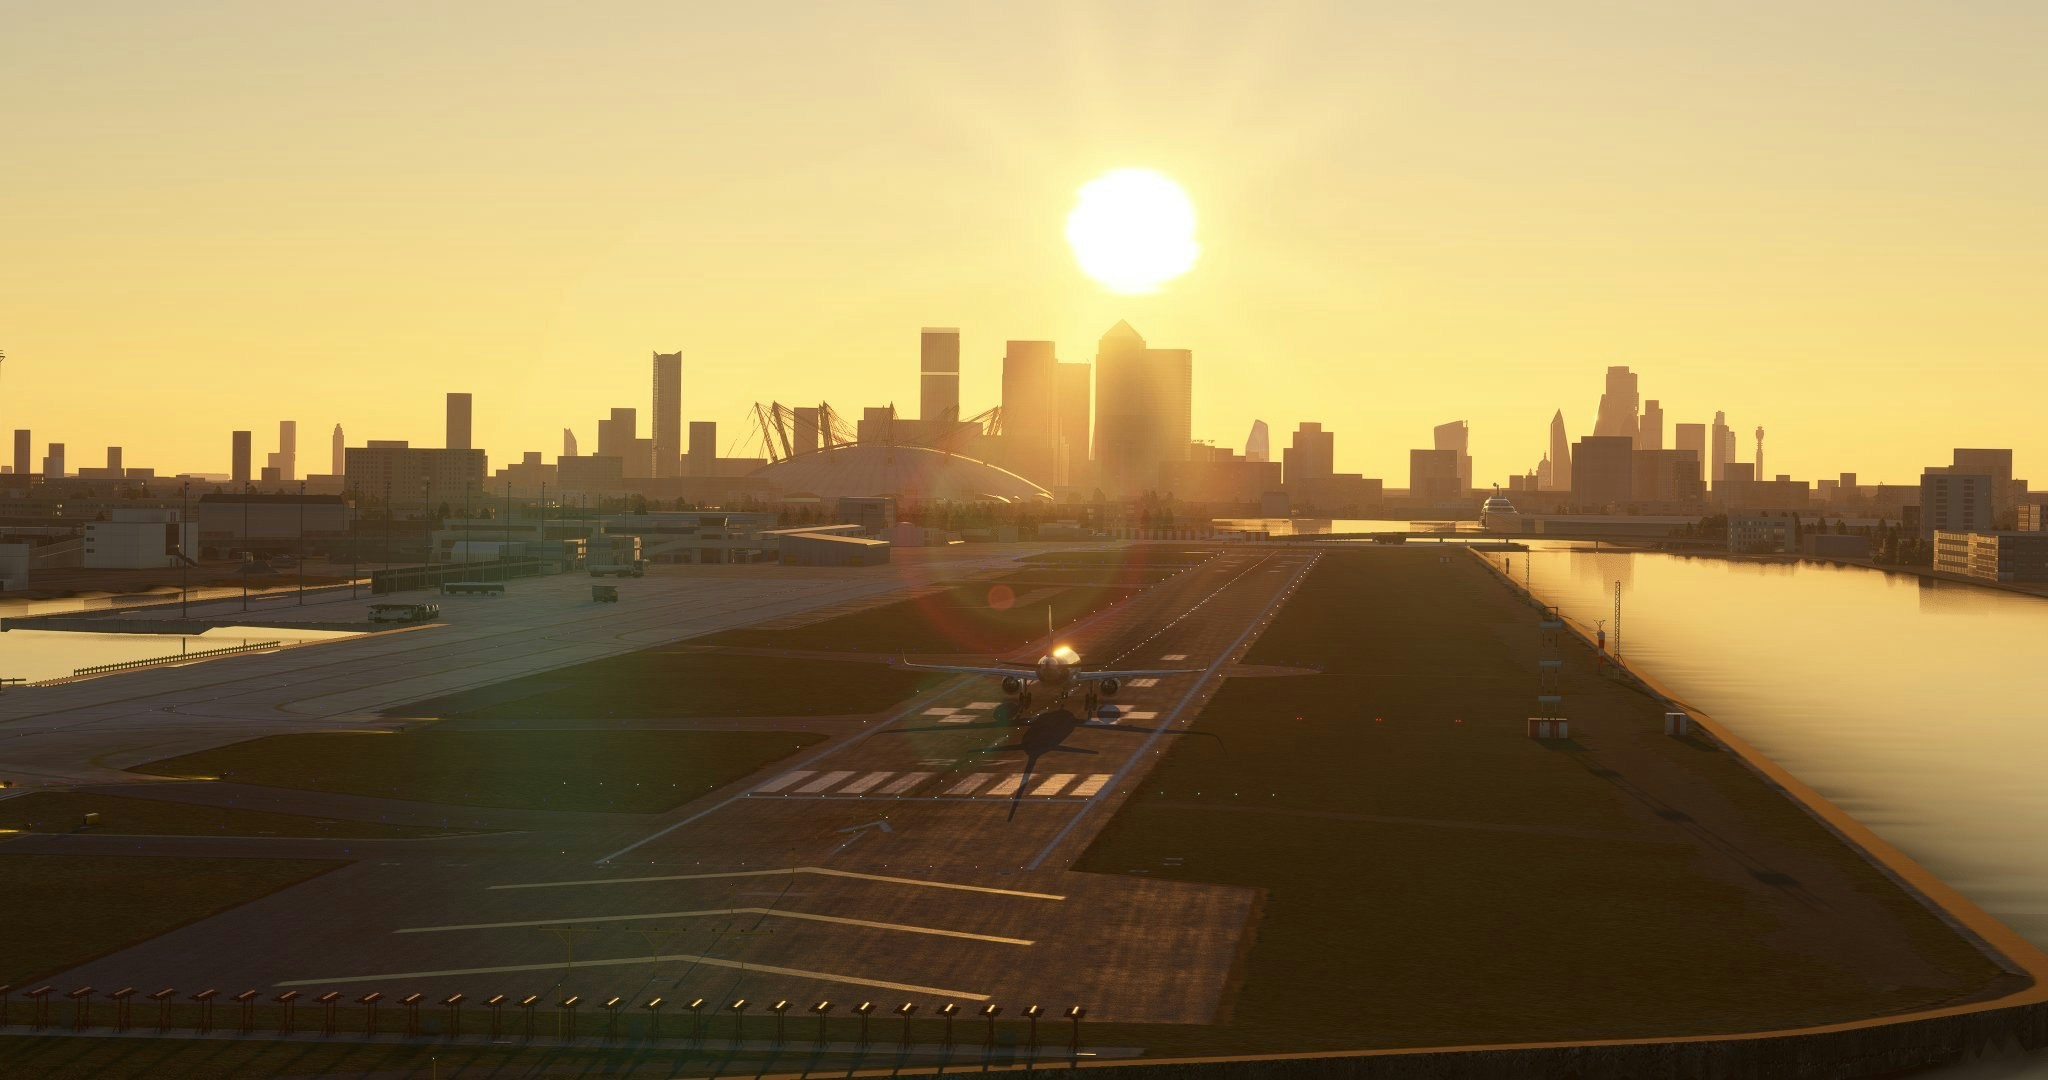 UK2000 Scenery Announces London City Airport for MSFS, Releasing May 4th